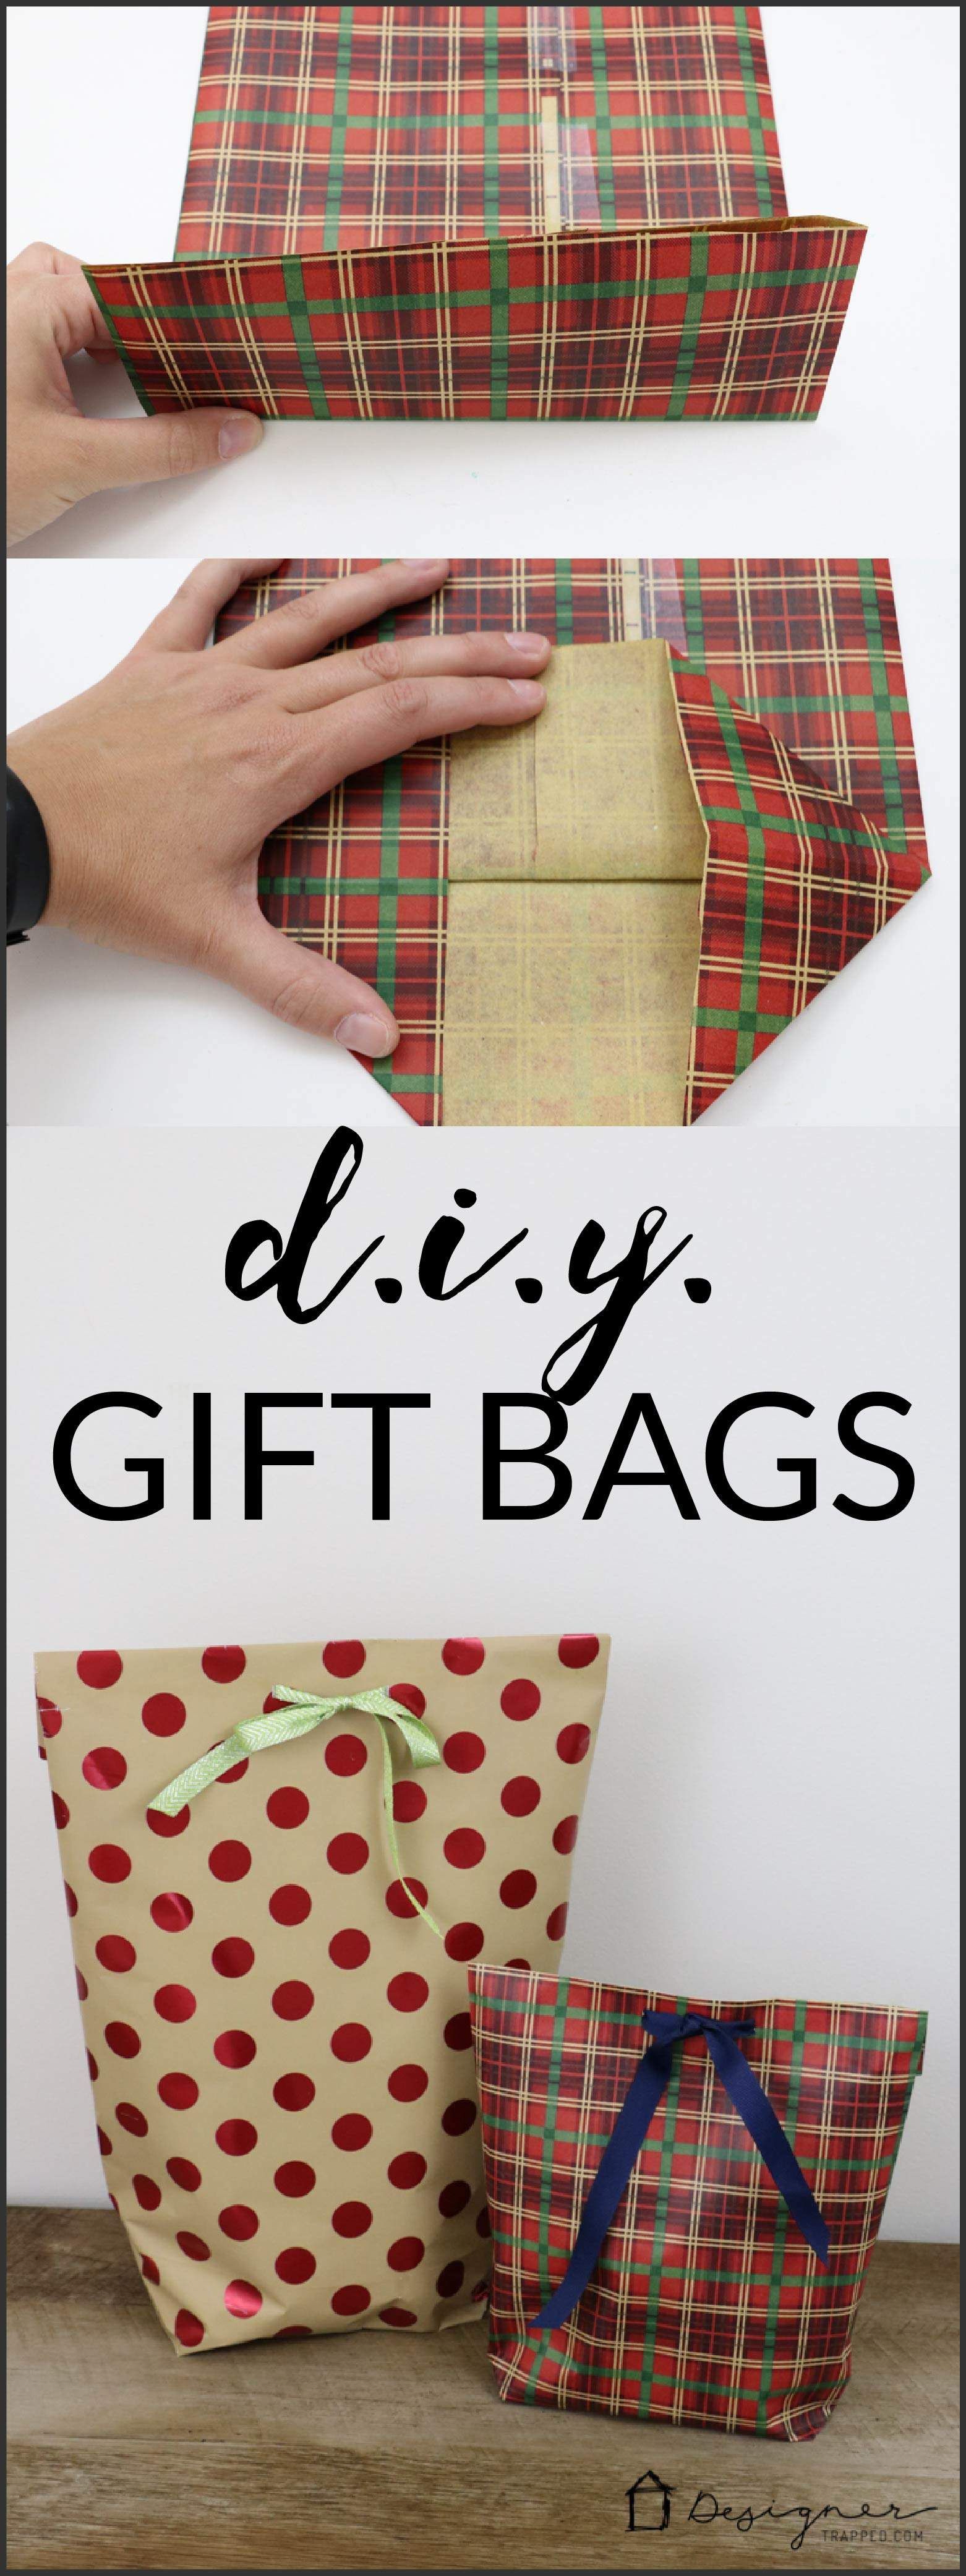 A MUST PIN FOR THE HOLIDAYS! Learn how to make a DIY gift bag from wrapping paper.